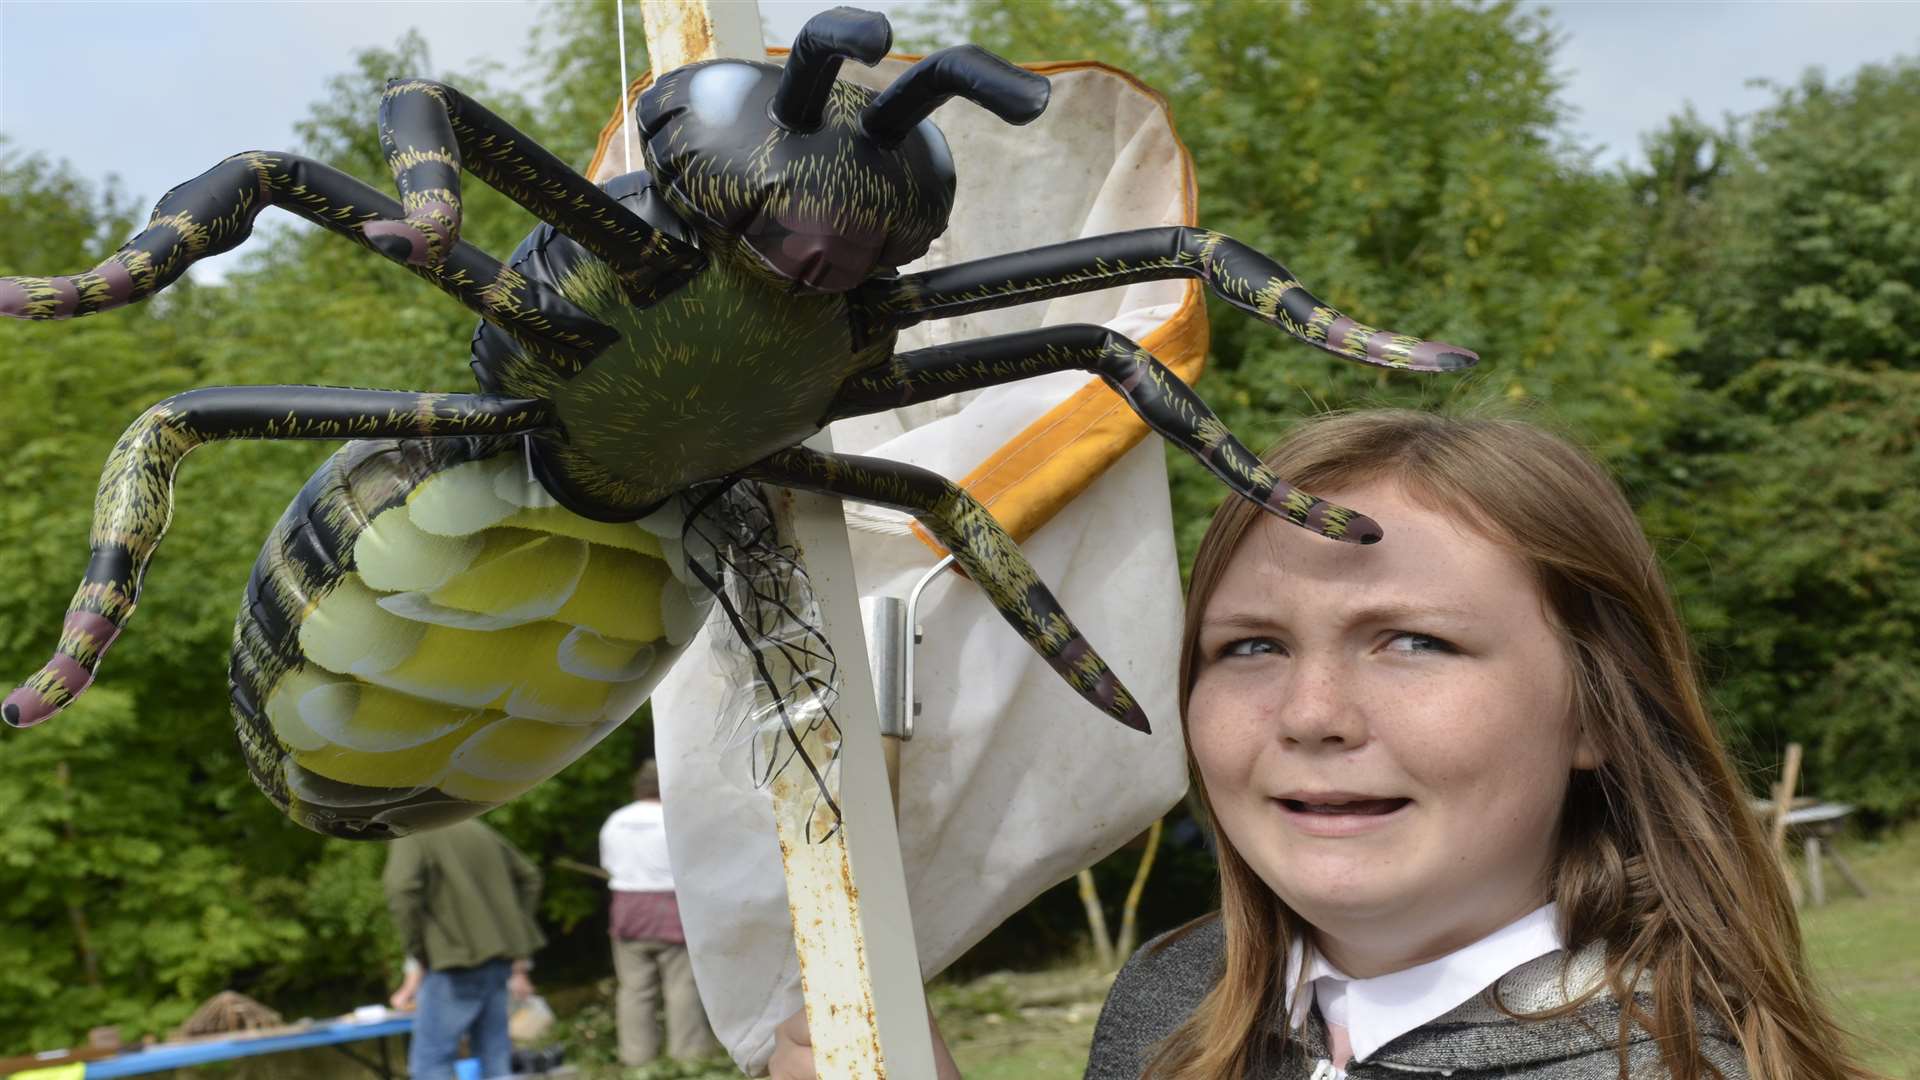 Katie Burlton, 12, of Sittingbourne at the Free Family Fun Day , The Meads Community Woods, Sittingbourne